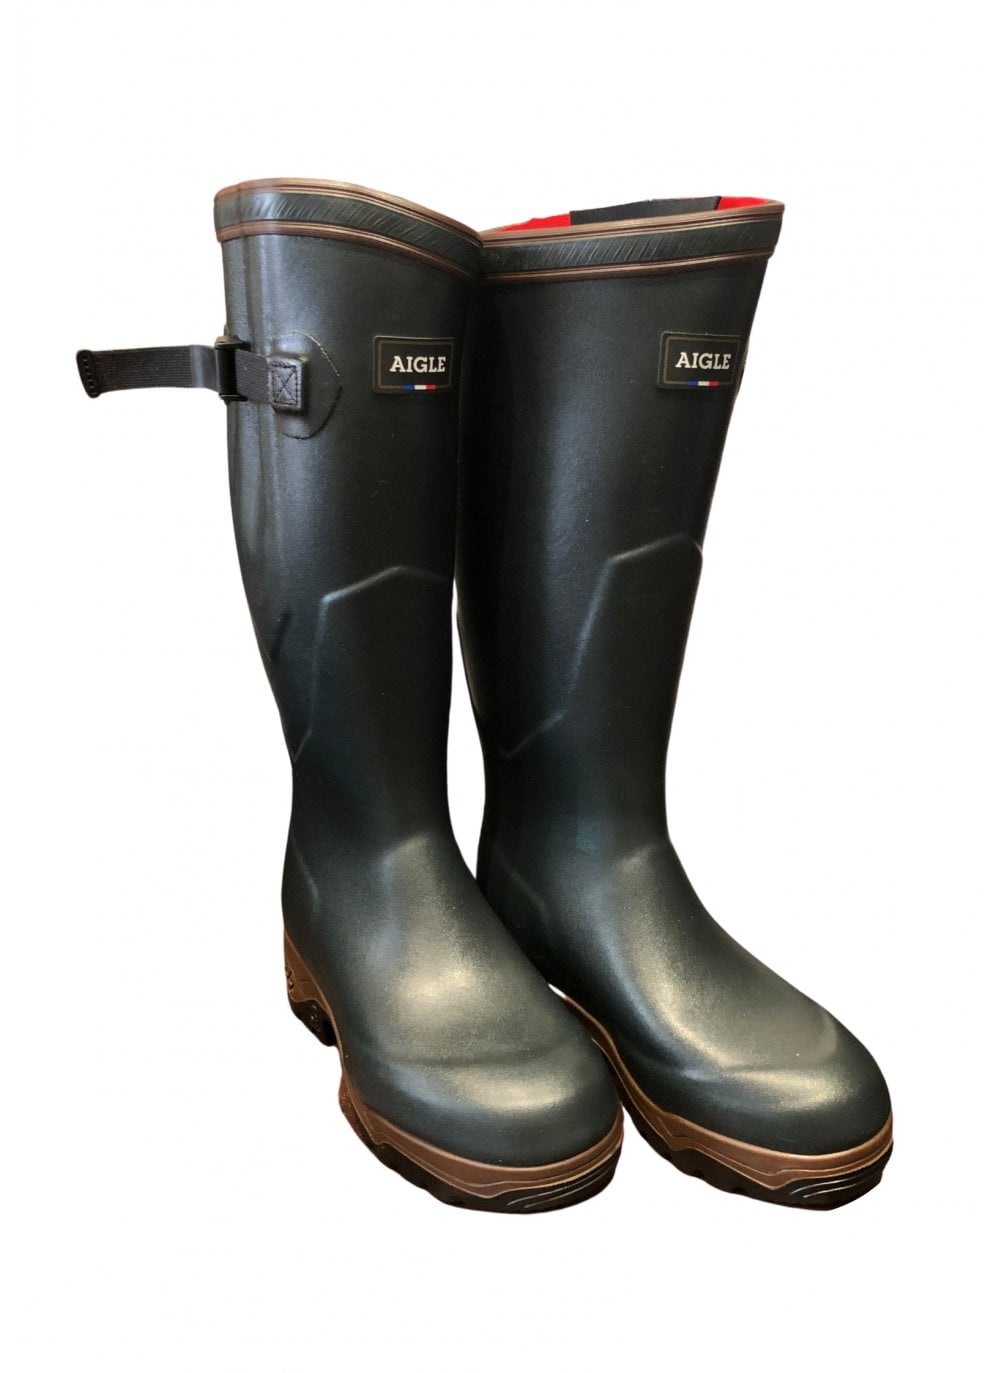 Alternativt forslag tilfredshed Brace aigle neoprene wellies ladies,www.spinephysiotherapy.com